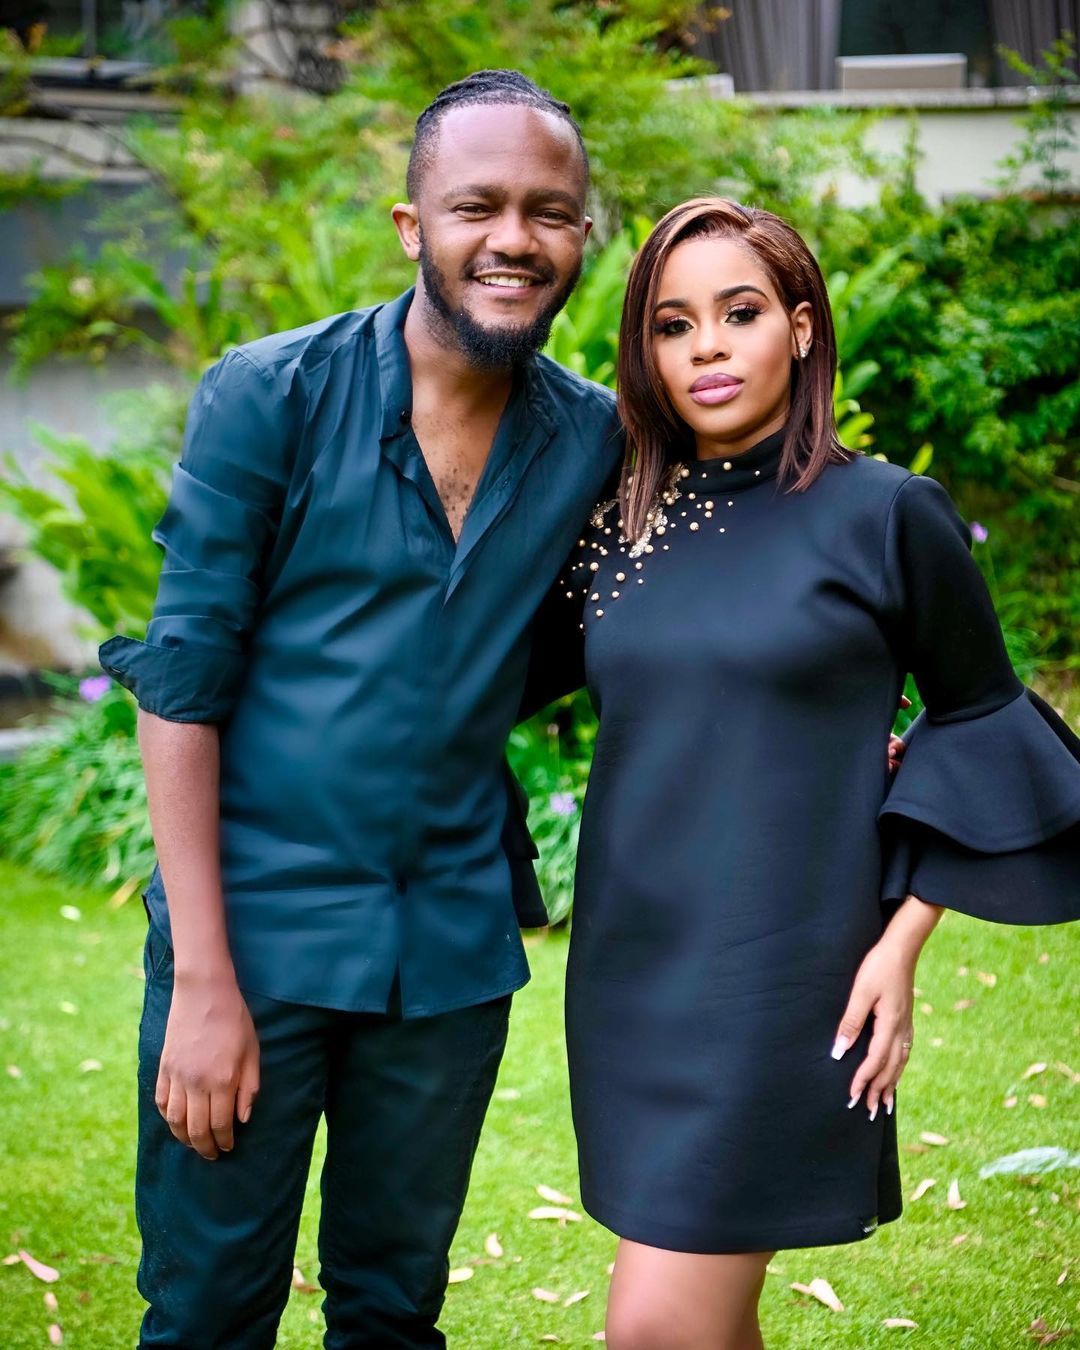 Kwetsa’s wife reveals shocking secret about her marriage